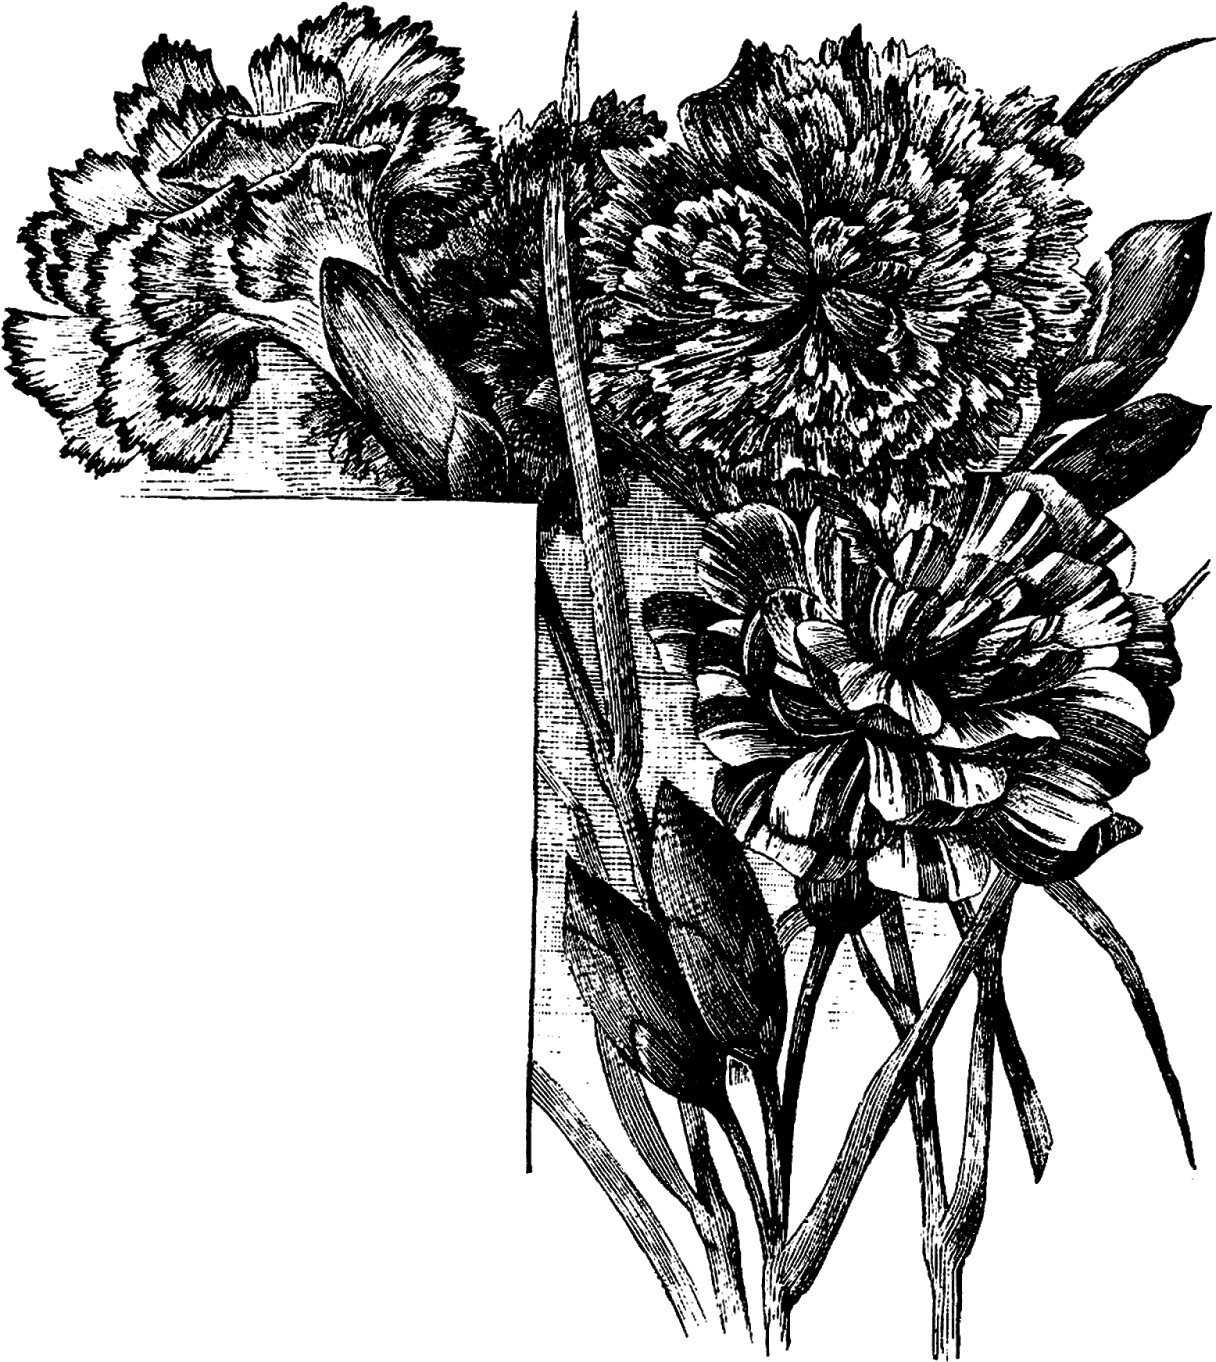 A Black And White Image Of Flowers